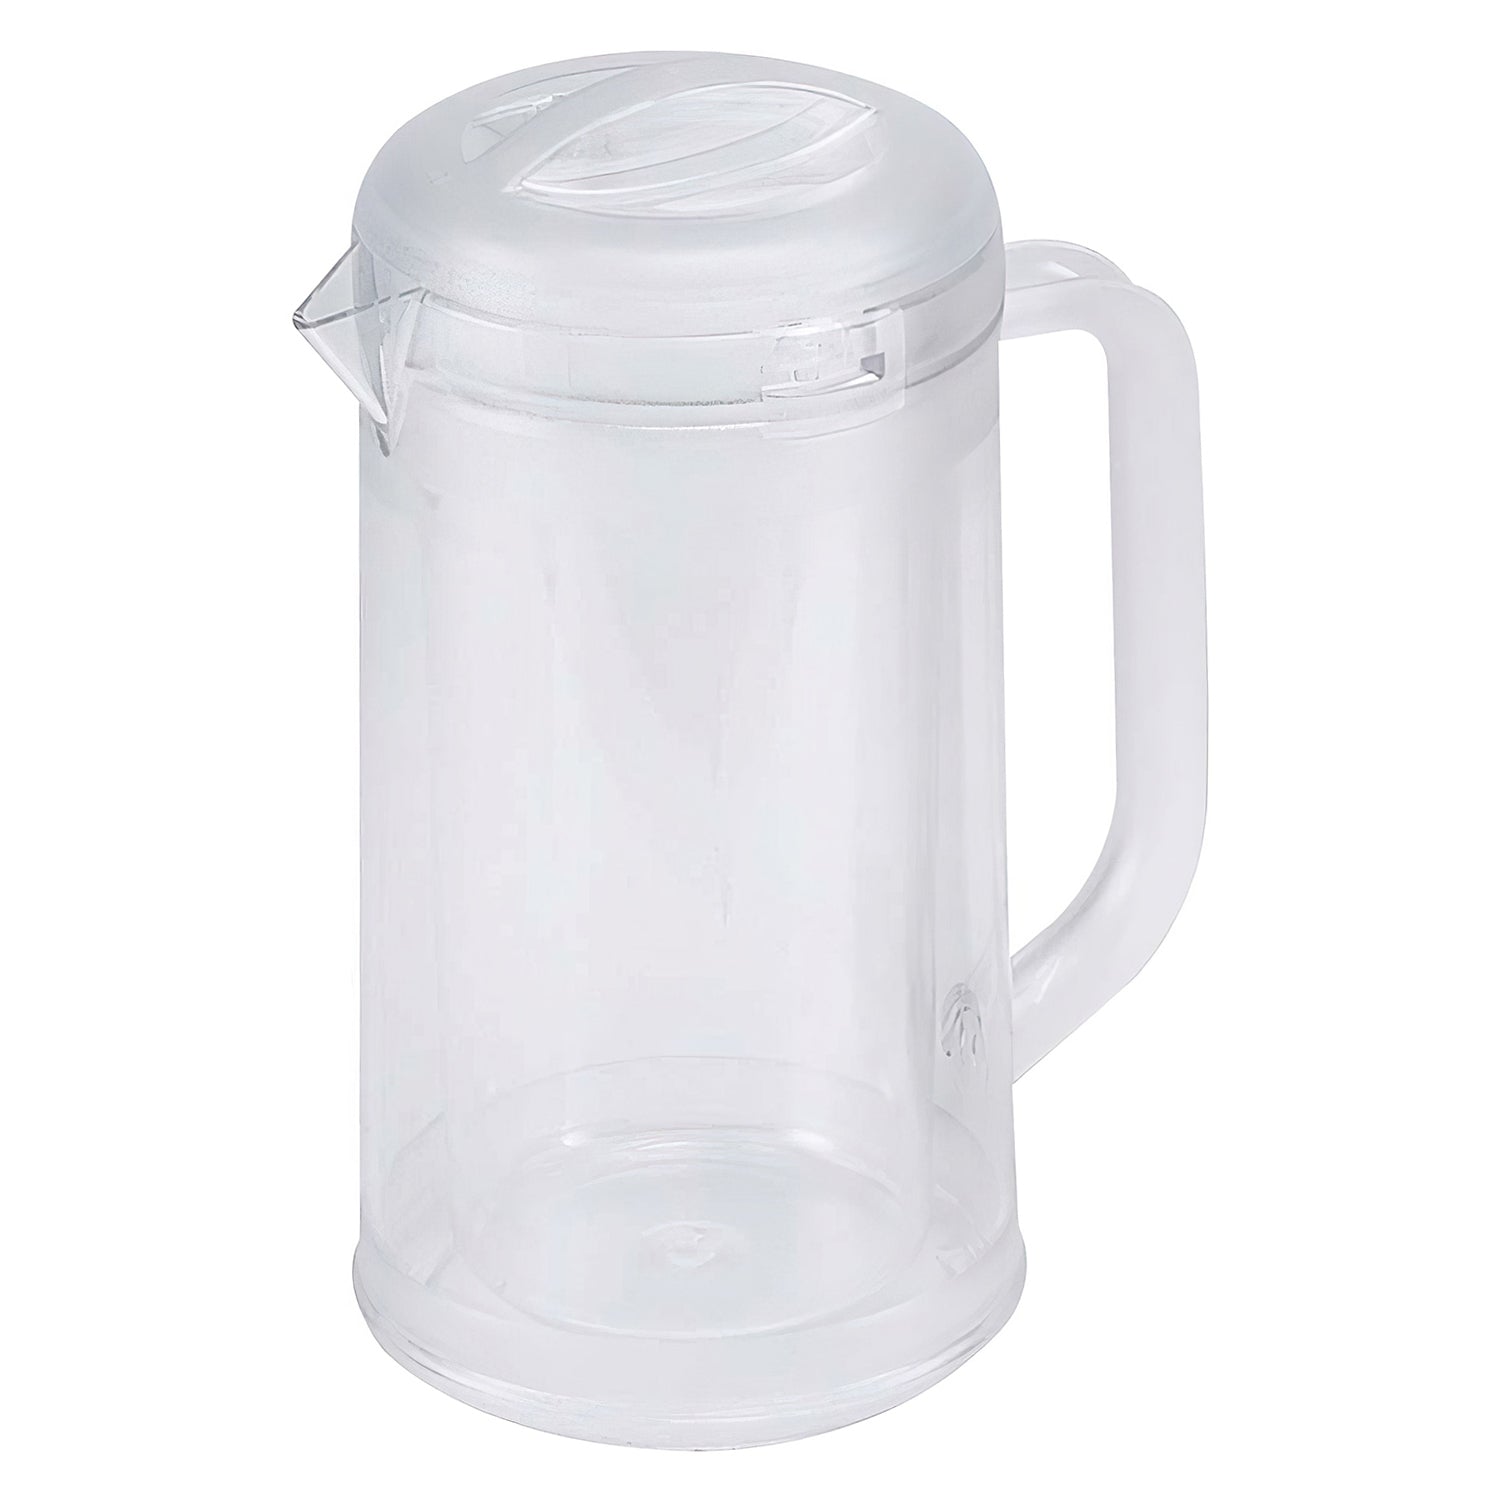 TIGER Stainless Steel Vacuum Carafe with Glass Liner 0.99L